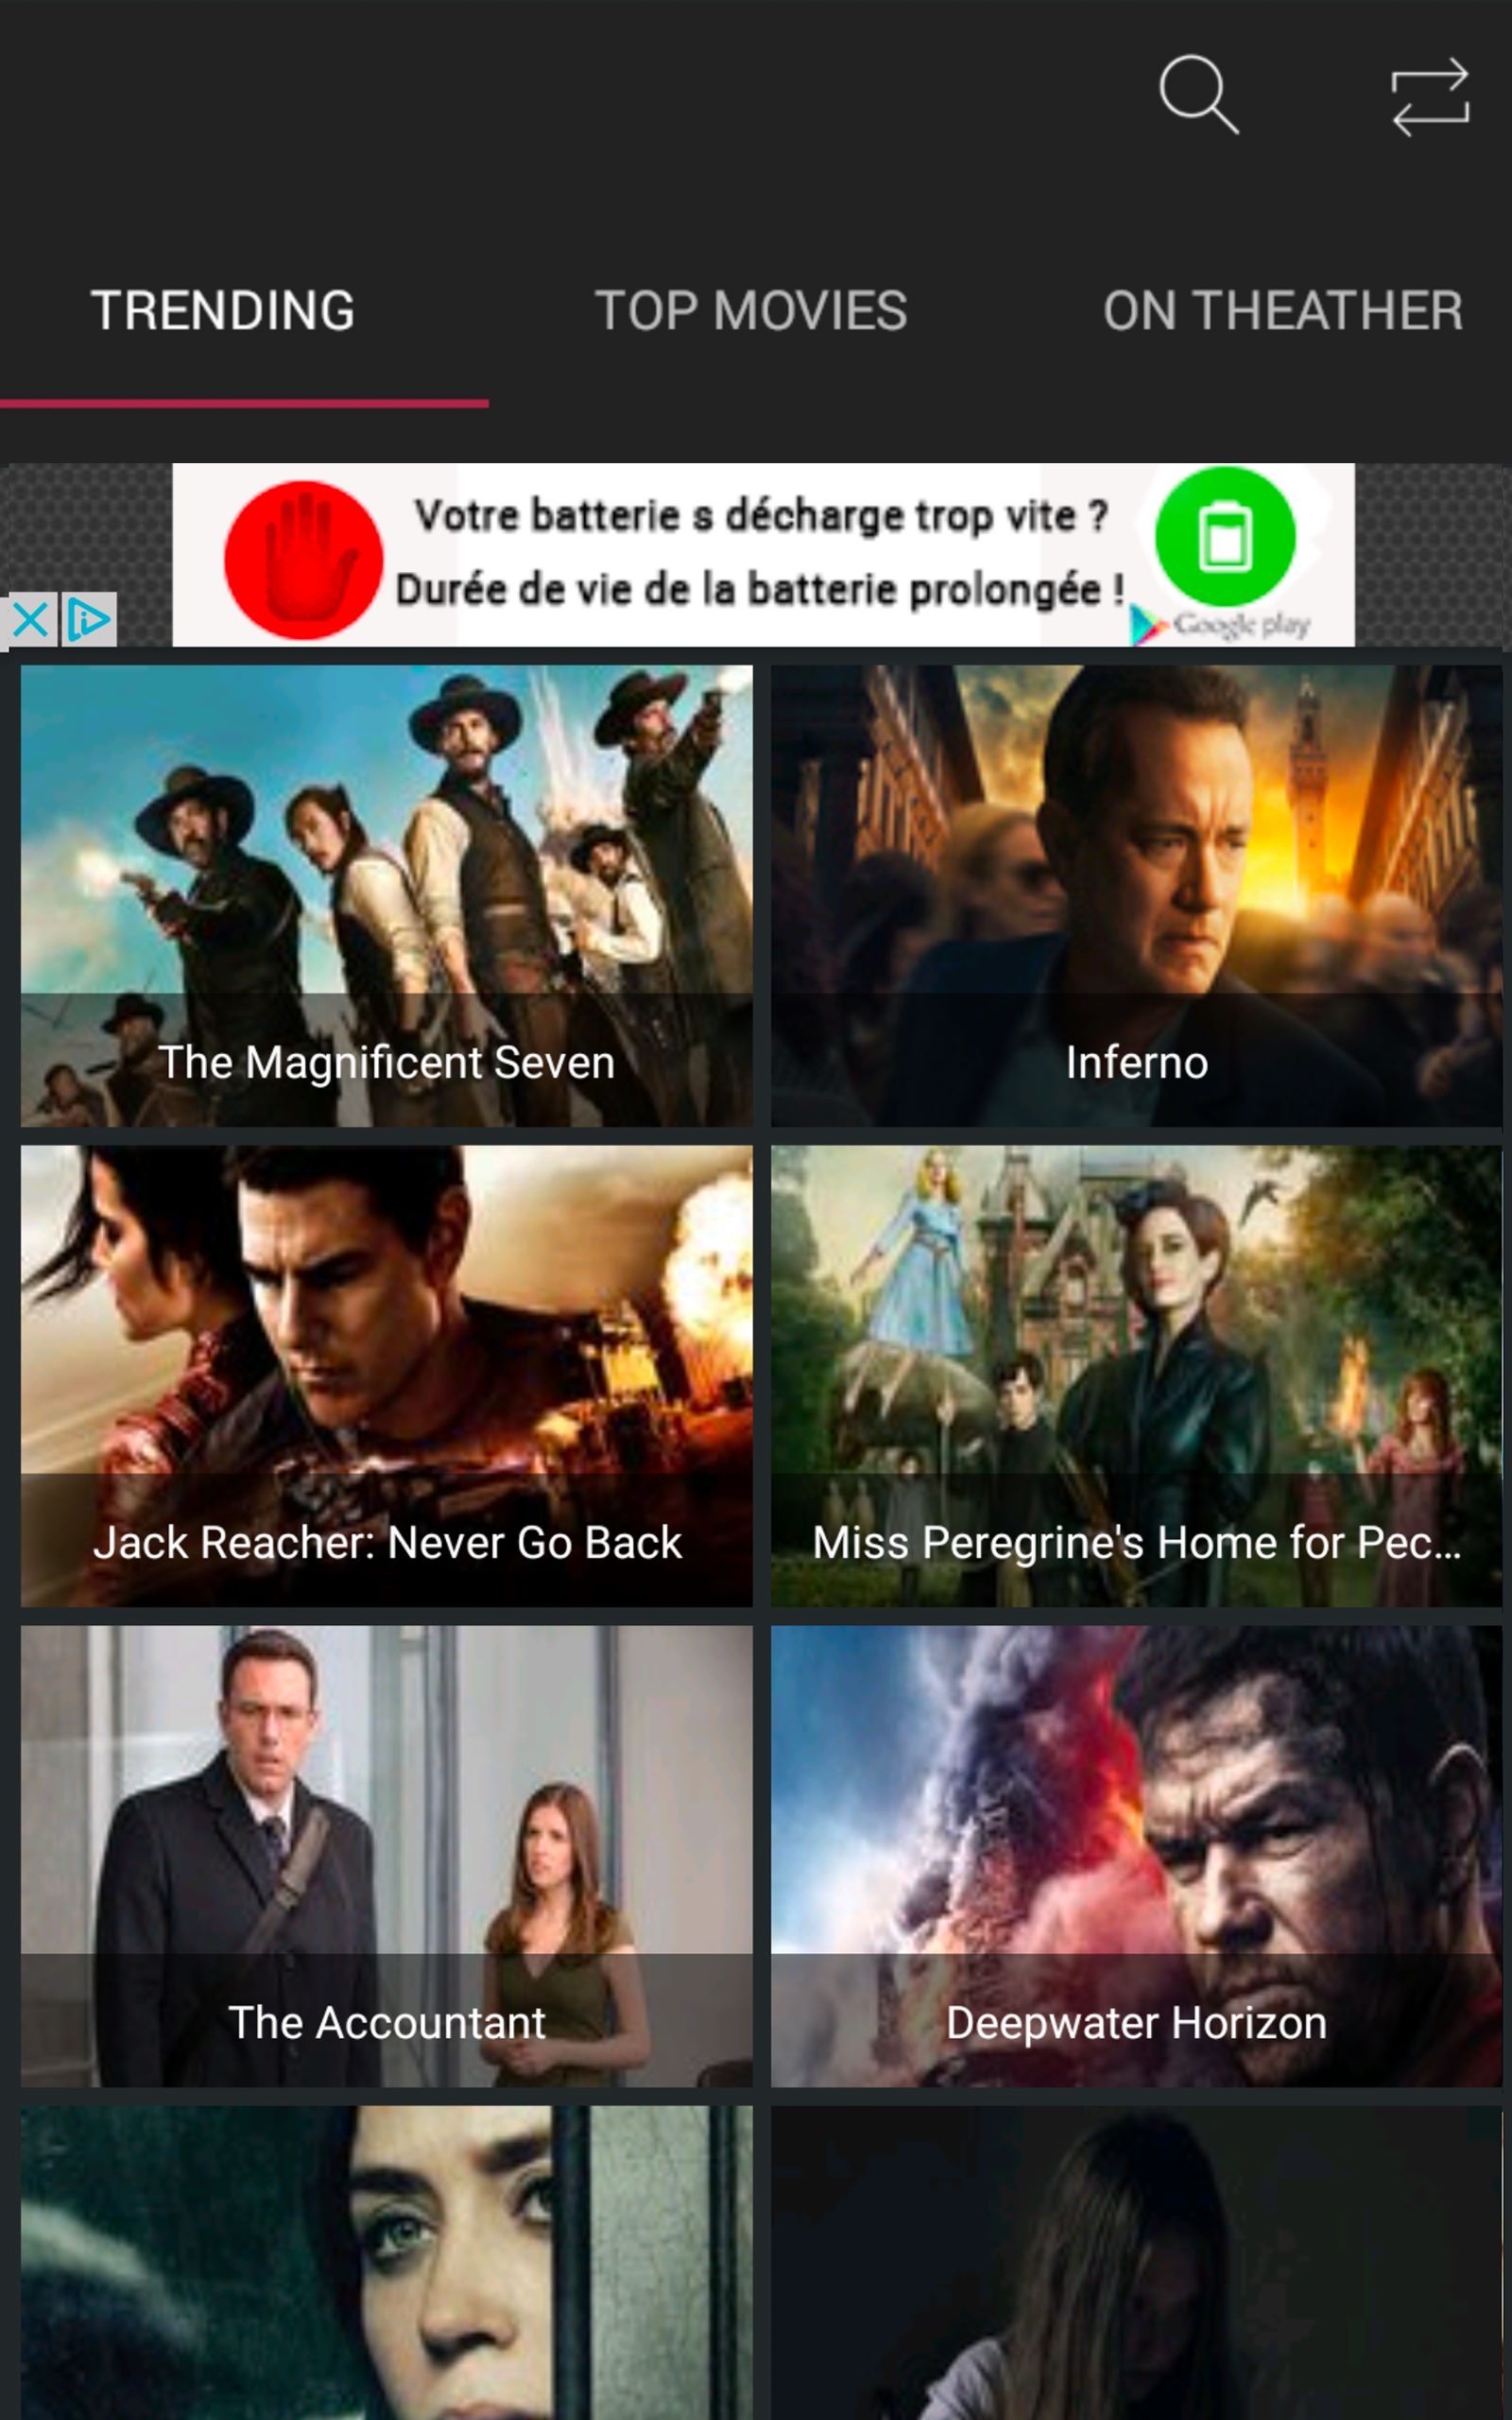 Mob Movie dro TV App : Free Movies & Shows Guide Recommendation For Kindle Fire HD